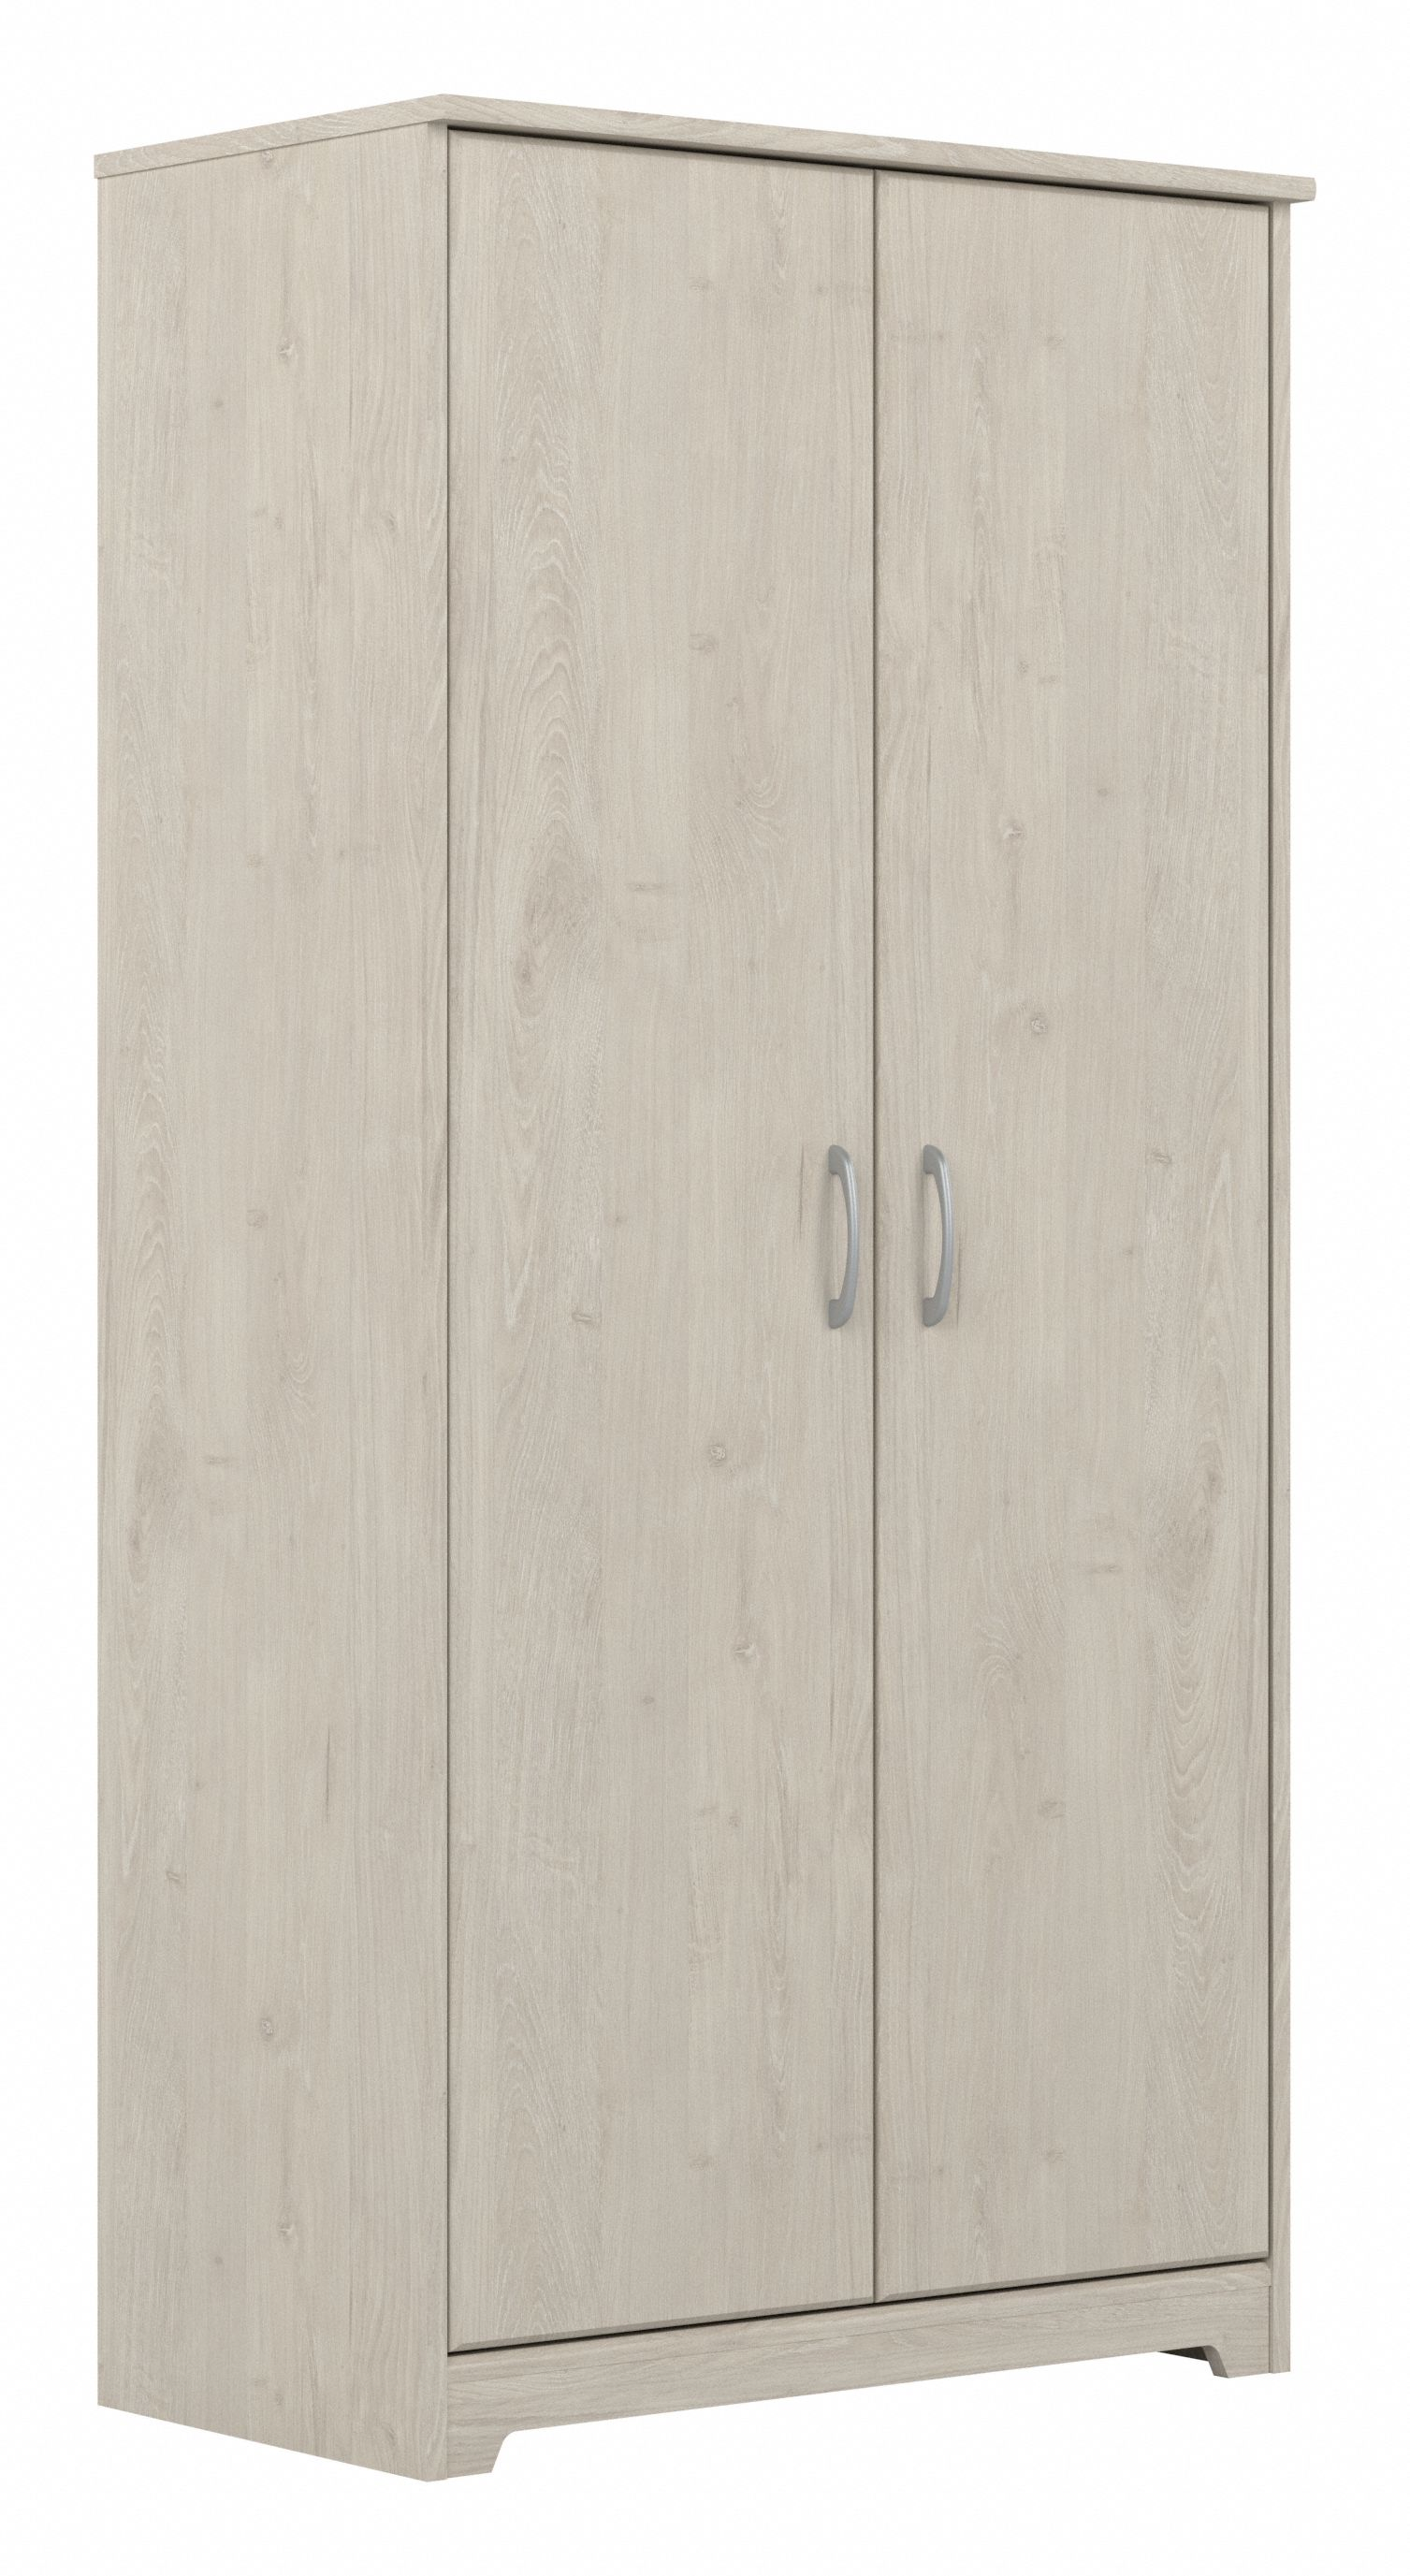 Shop Bush Furniture Cabot Tall Storage Cabinet with Doors 02 WC31199 #color_linen white oak